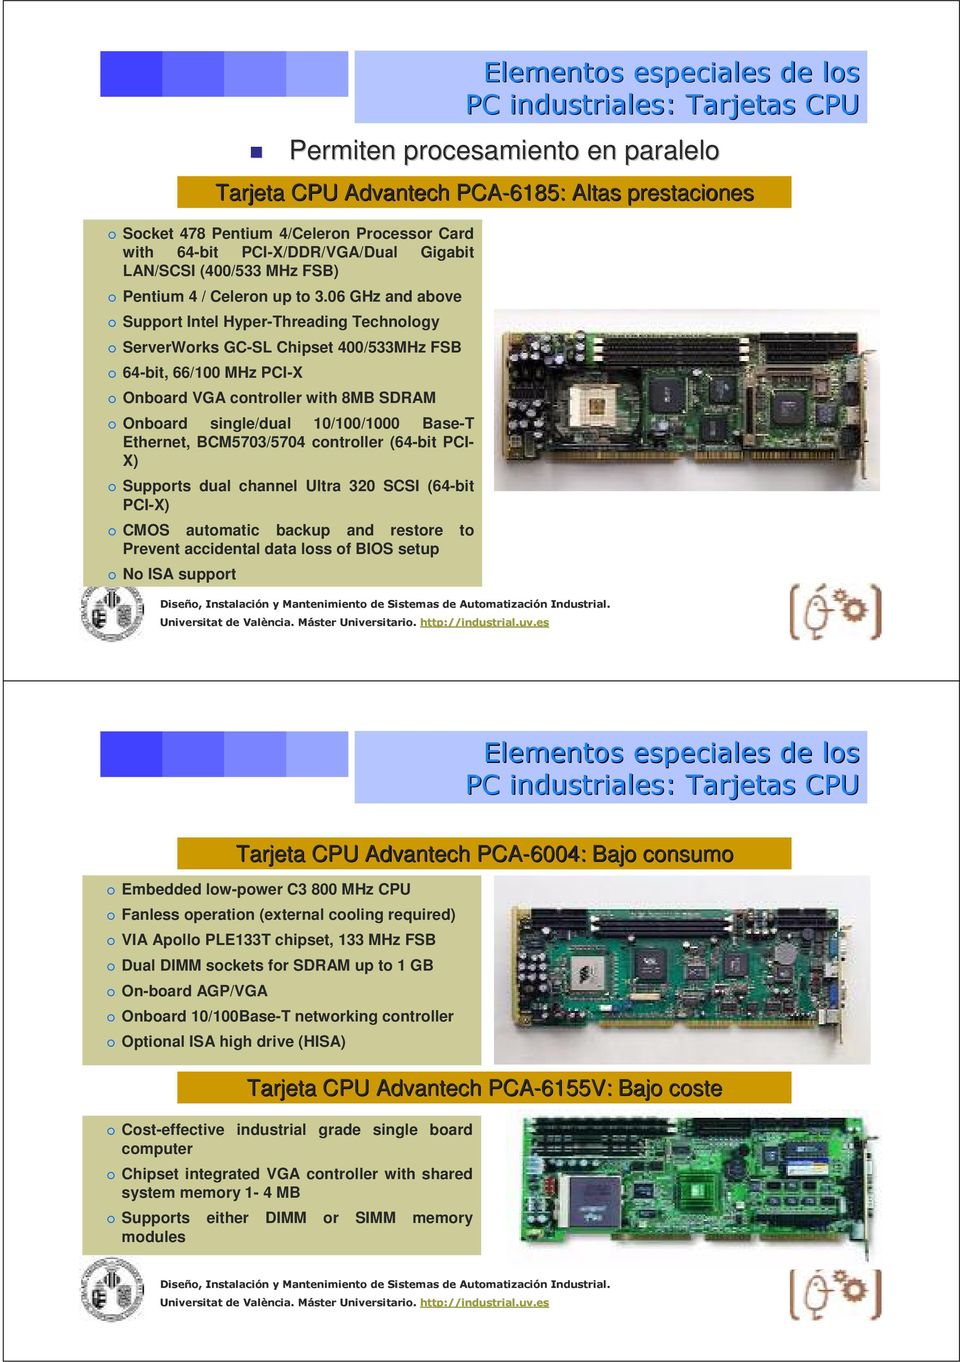 06 GHz and above Support Intel Hyper-Threading Technology ServerWorks GC-SL Chipset 400/533MHz FSB 64-bit, 66/100 MHz PCI-X Onboard VGA controller with 8MB SDRAM Onboard single/dual 10/100/1000